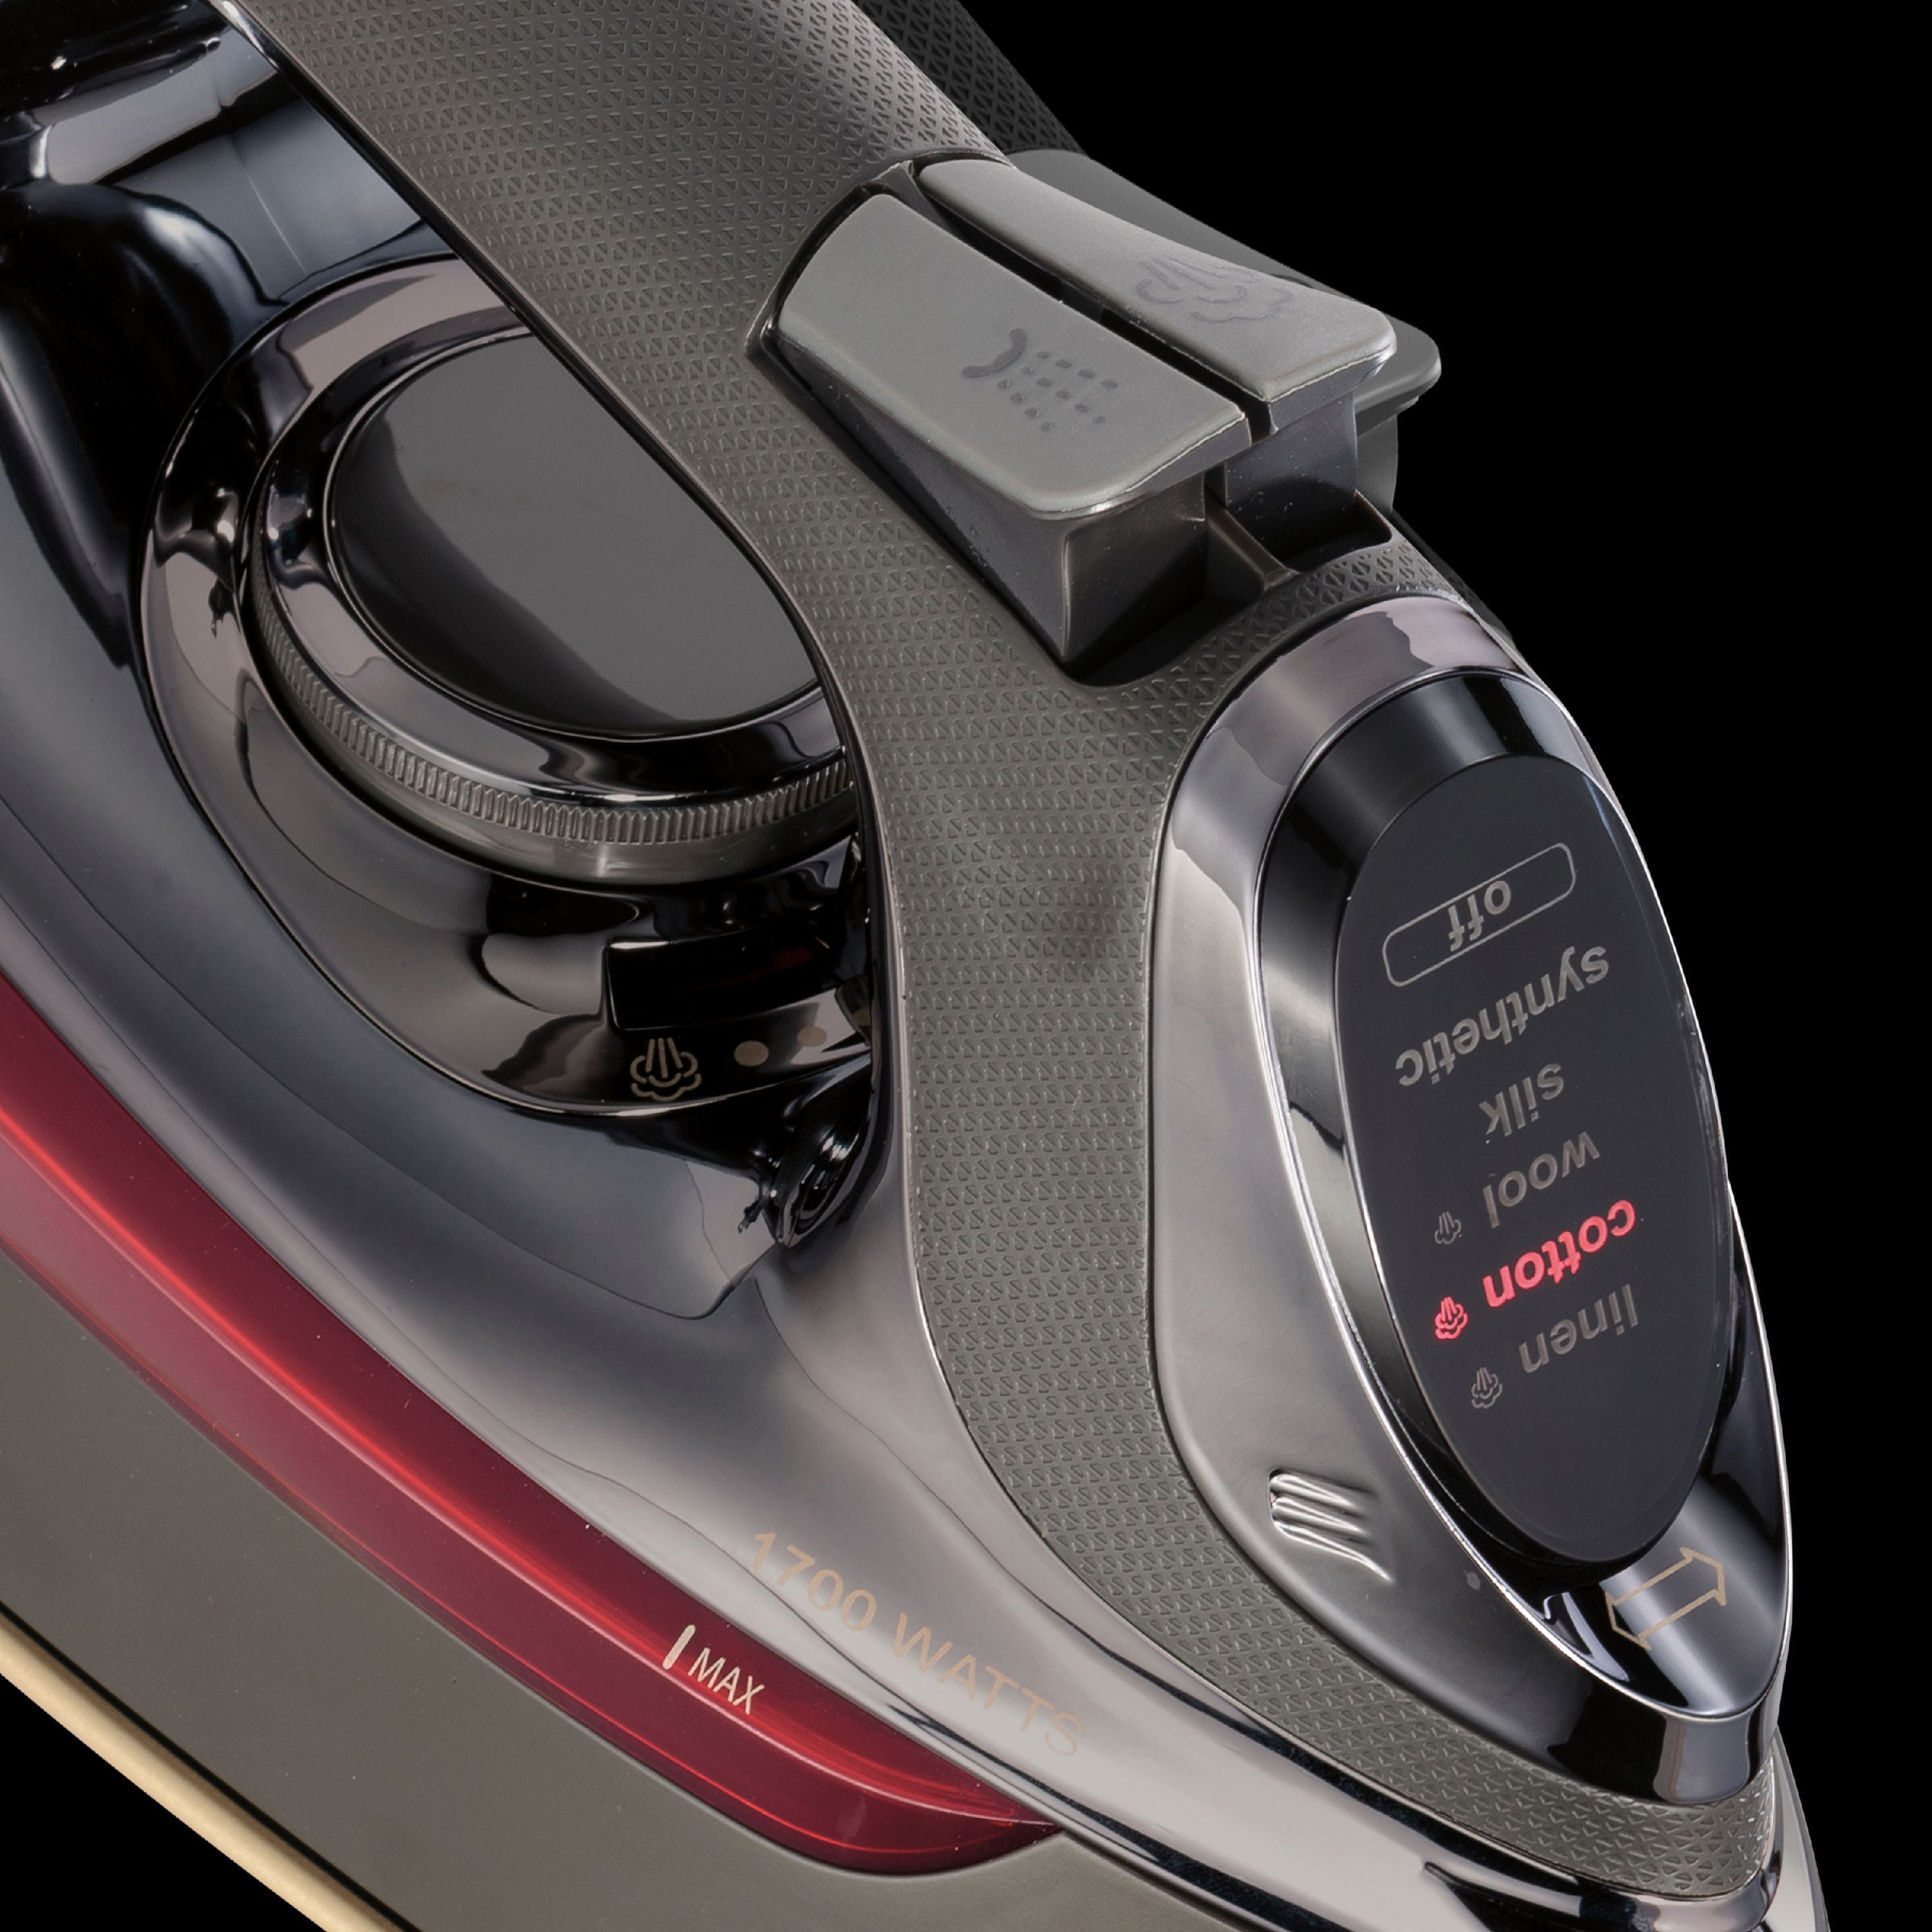 CHI Lava Electronic Iron with Retractable Cord